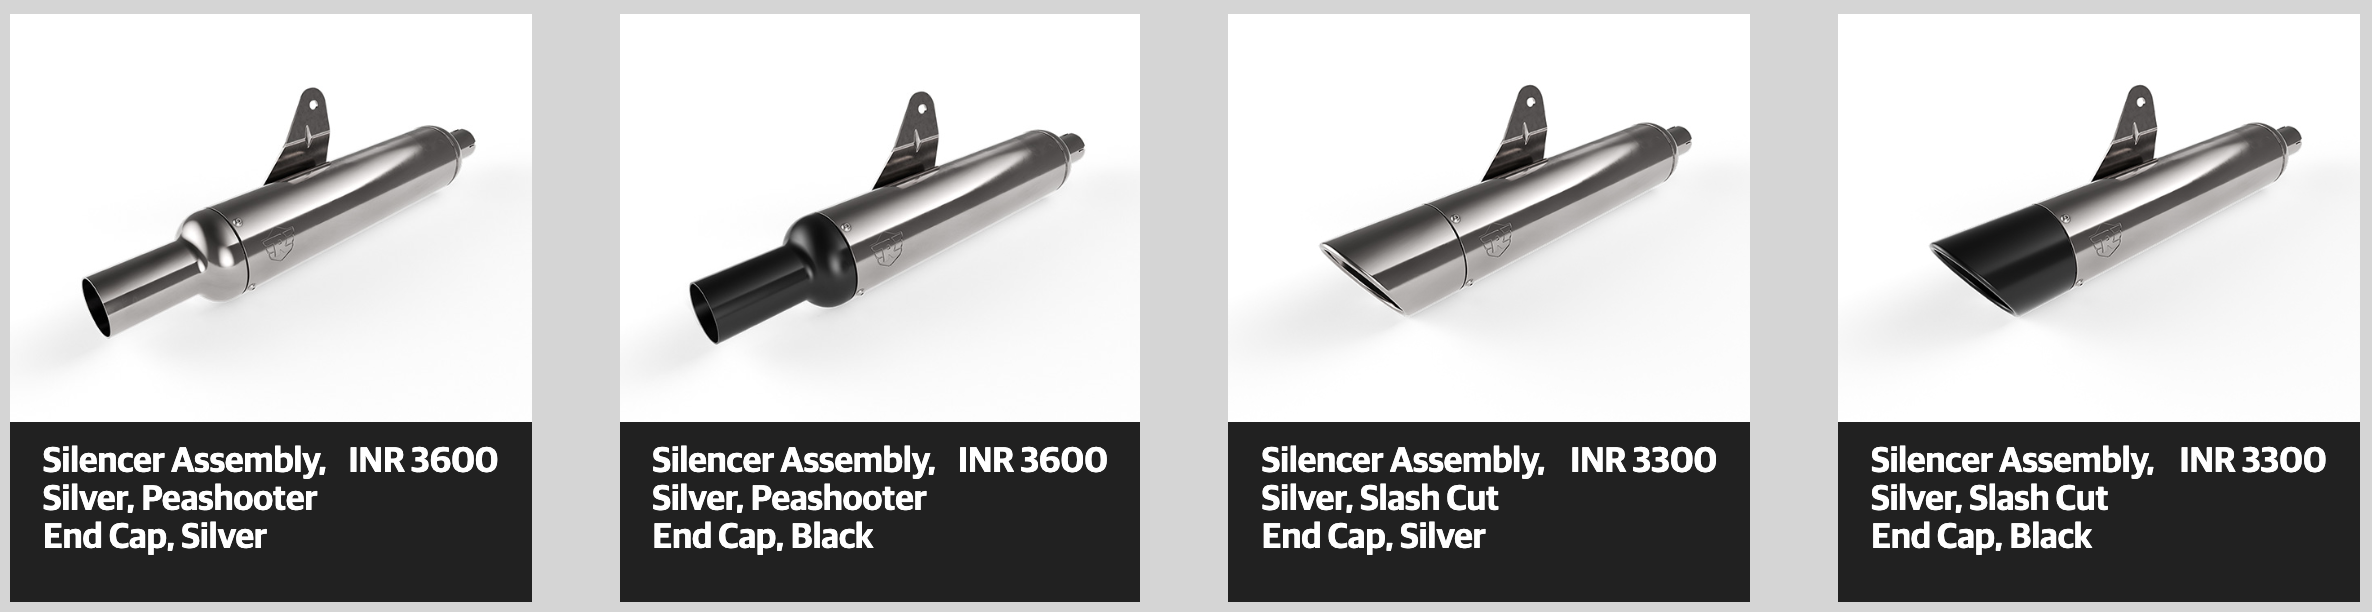 BS3 and BS4 Royal Enfield Classic 350 Silencers Price List - snap